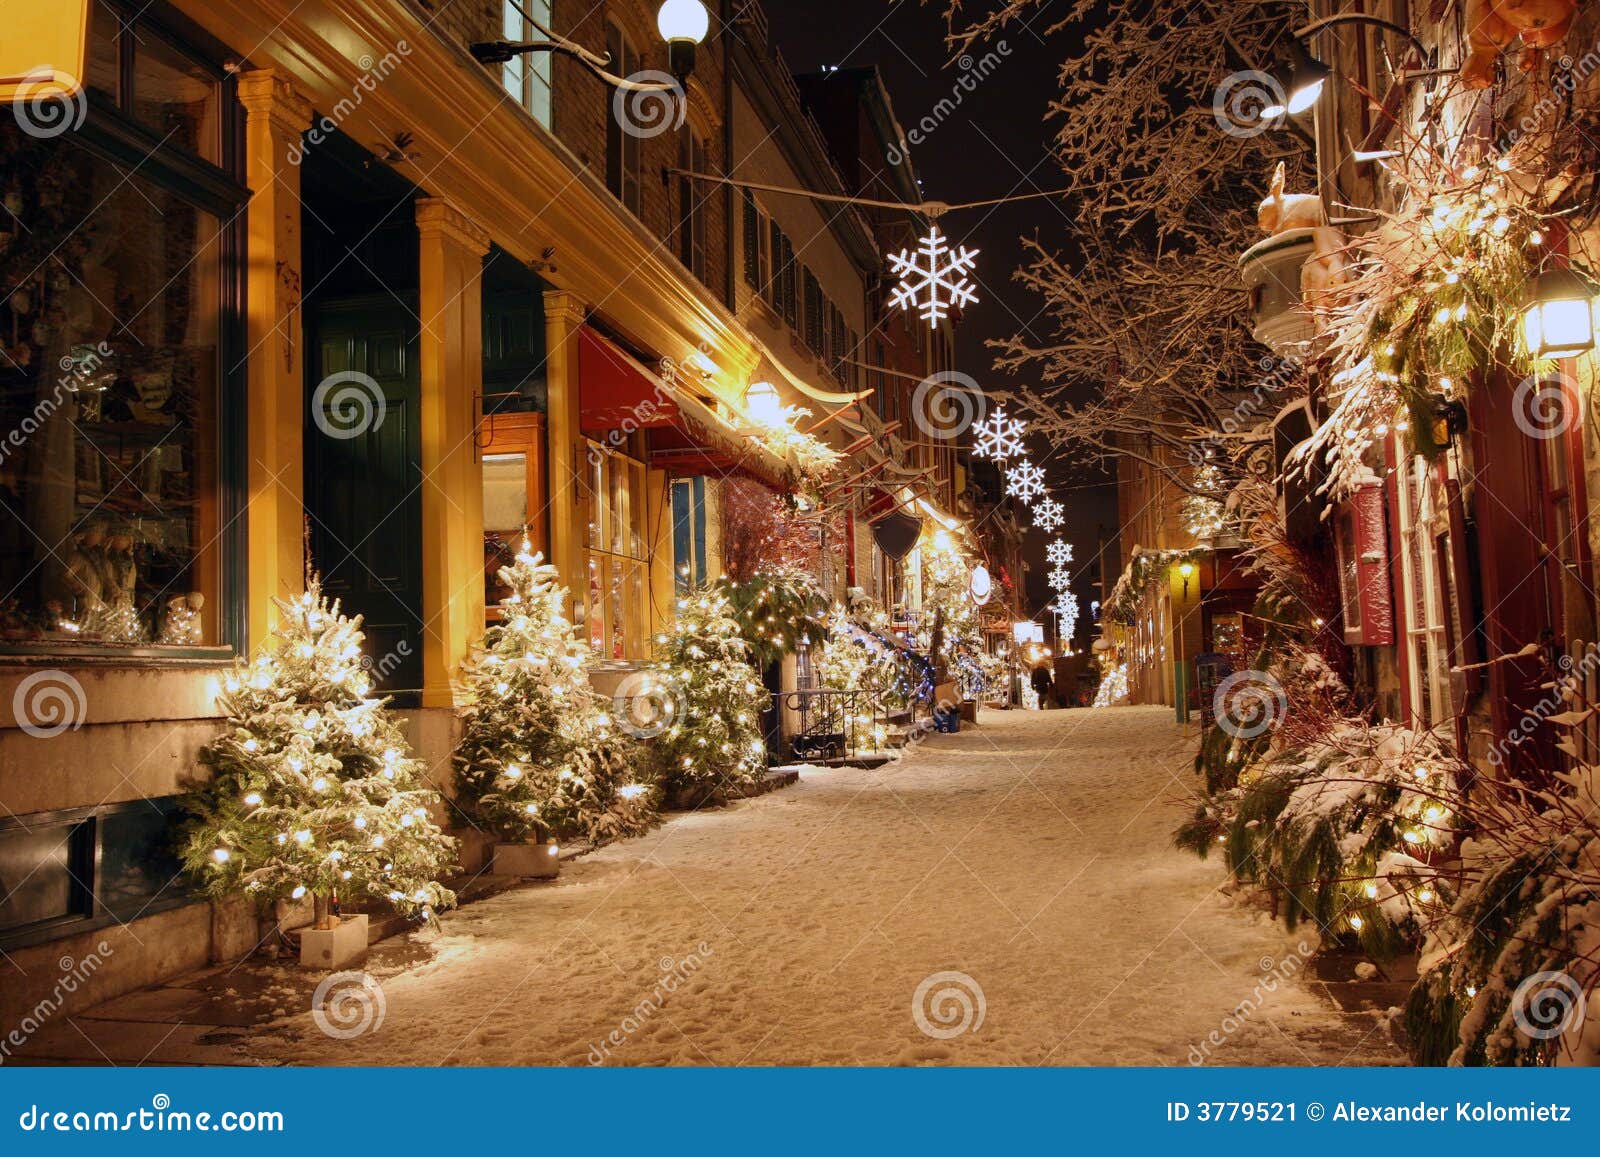 christmas night in quebec city